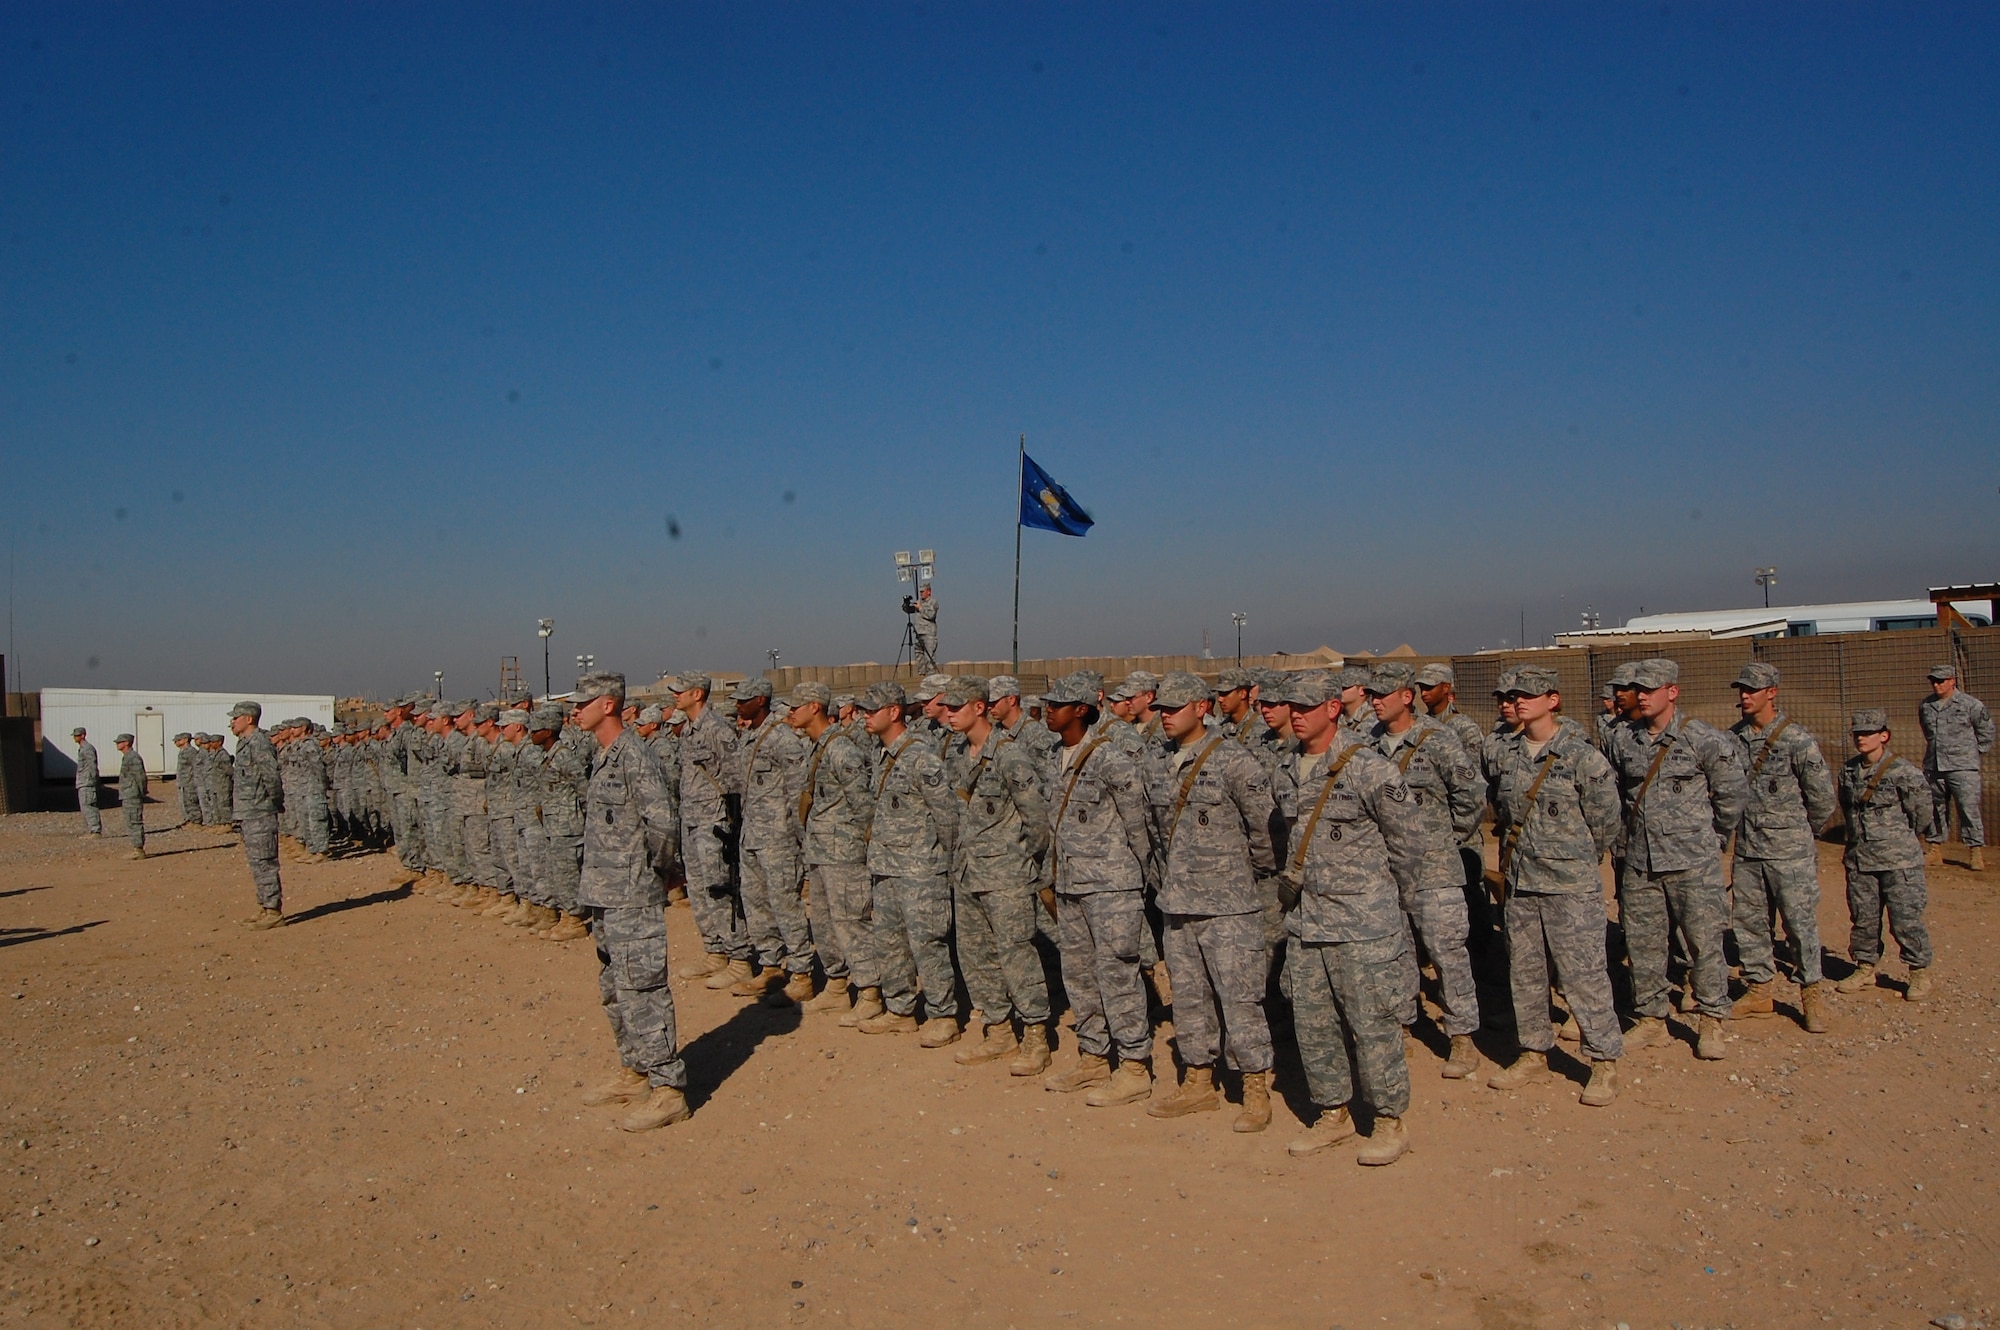 CAMP BUCCA, Iraq -- Members of the 887th Expeditionary Security Force Squadron stand in formation during the squadron’s deactivation ceremony Dec. 3. During their time there, members of the 887th ESFS conducted more than 6,500 outside-the-wire patrols in addition to 1,700 Air Force ISR missions. (U.S. Air Force photo/Staff Sgt. Shaun Emery)